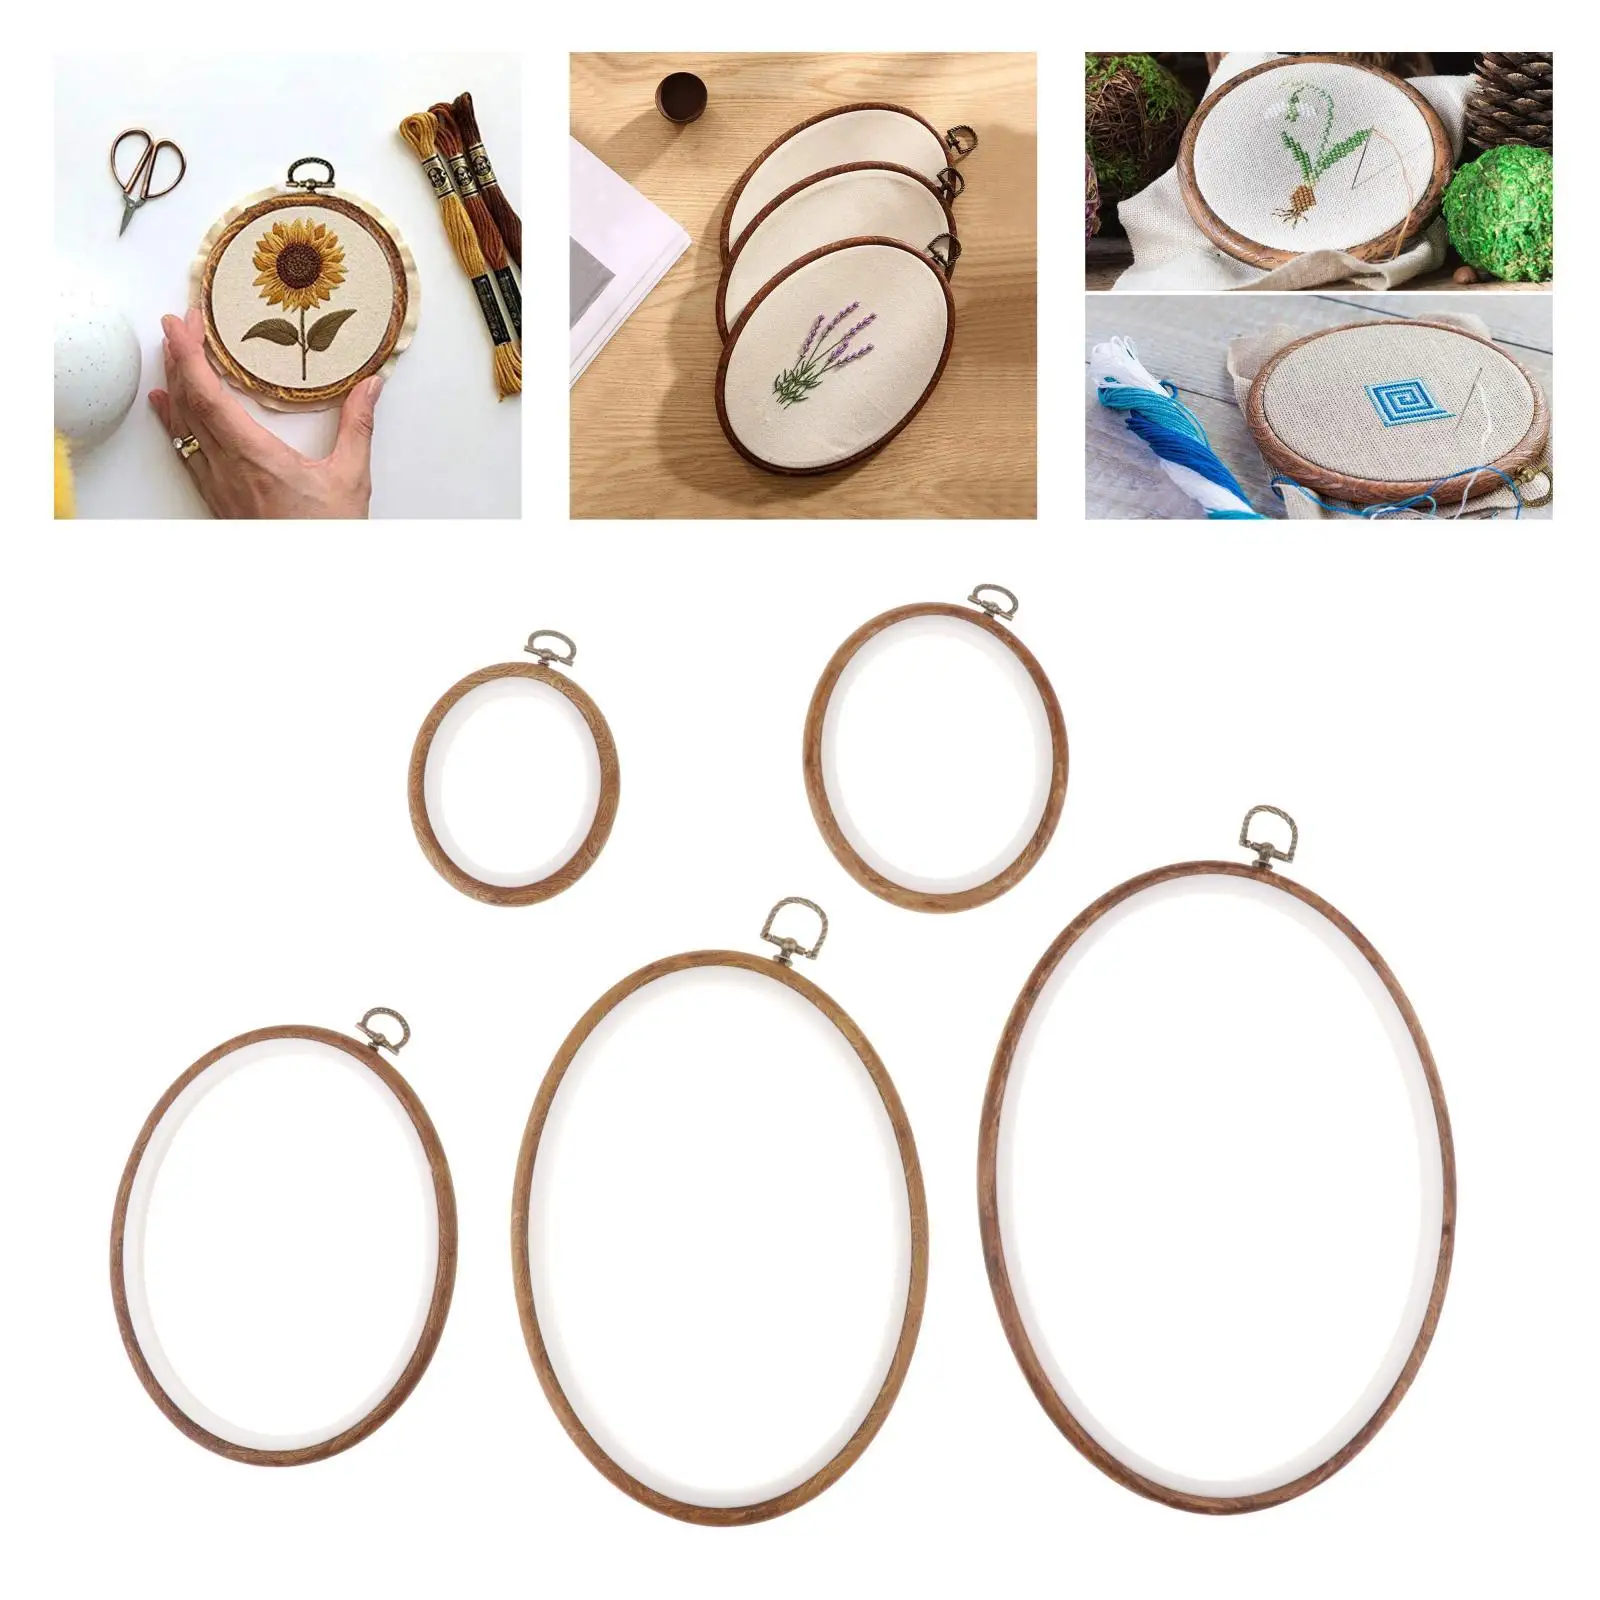  4inch Embroidery Hoop Frames for Display - Oval Small Cross  Stitch Hoops Set, 6 Pieces Resin Imitated Wood Hoop Hanging Frame Circle  for Craft Decoration